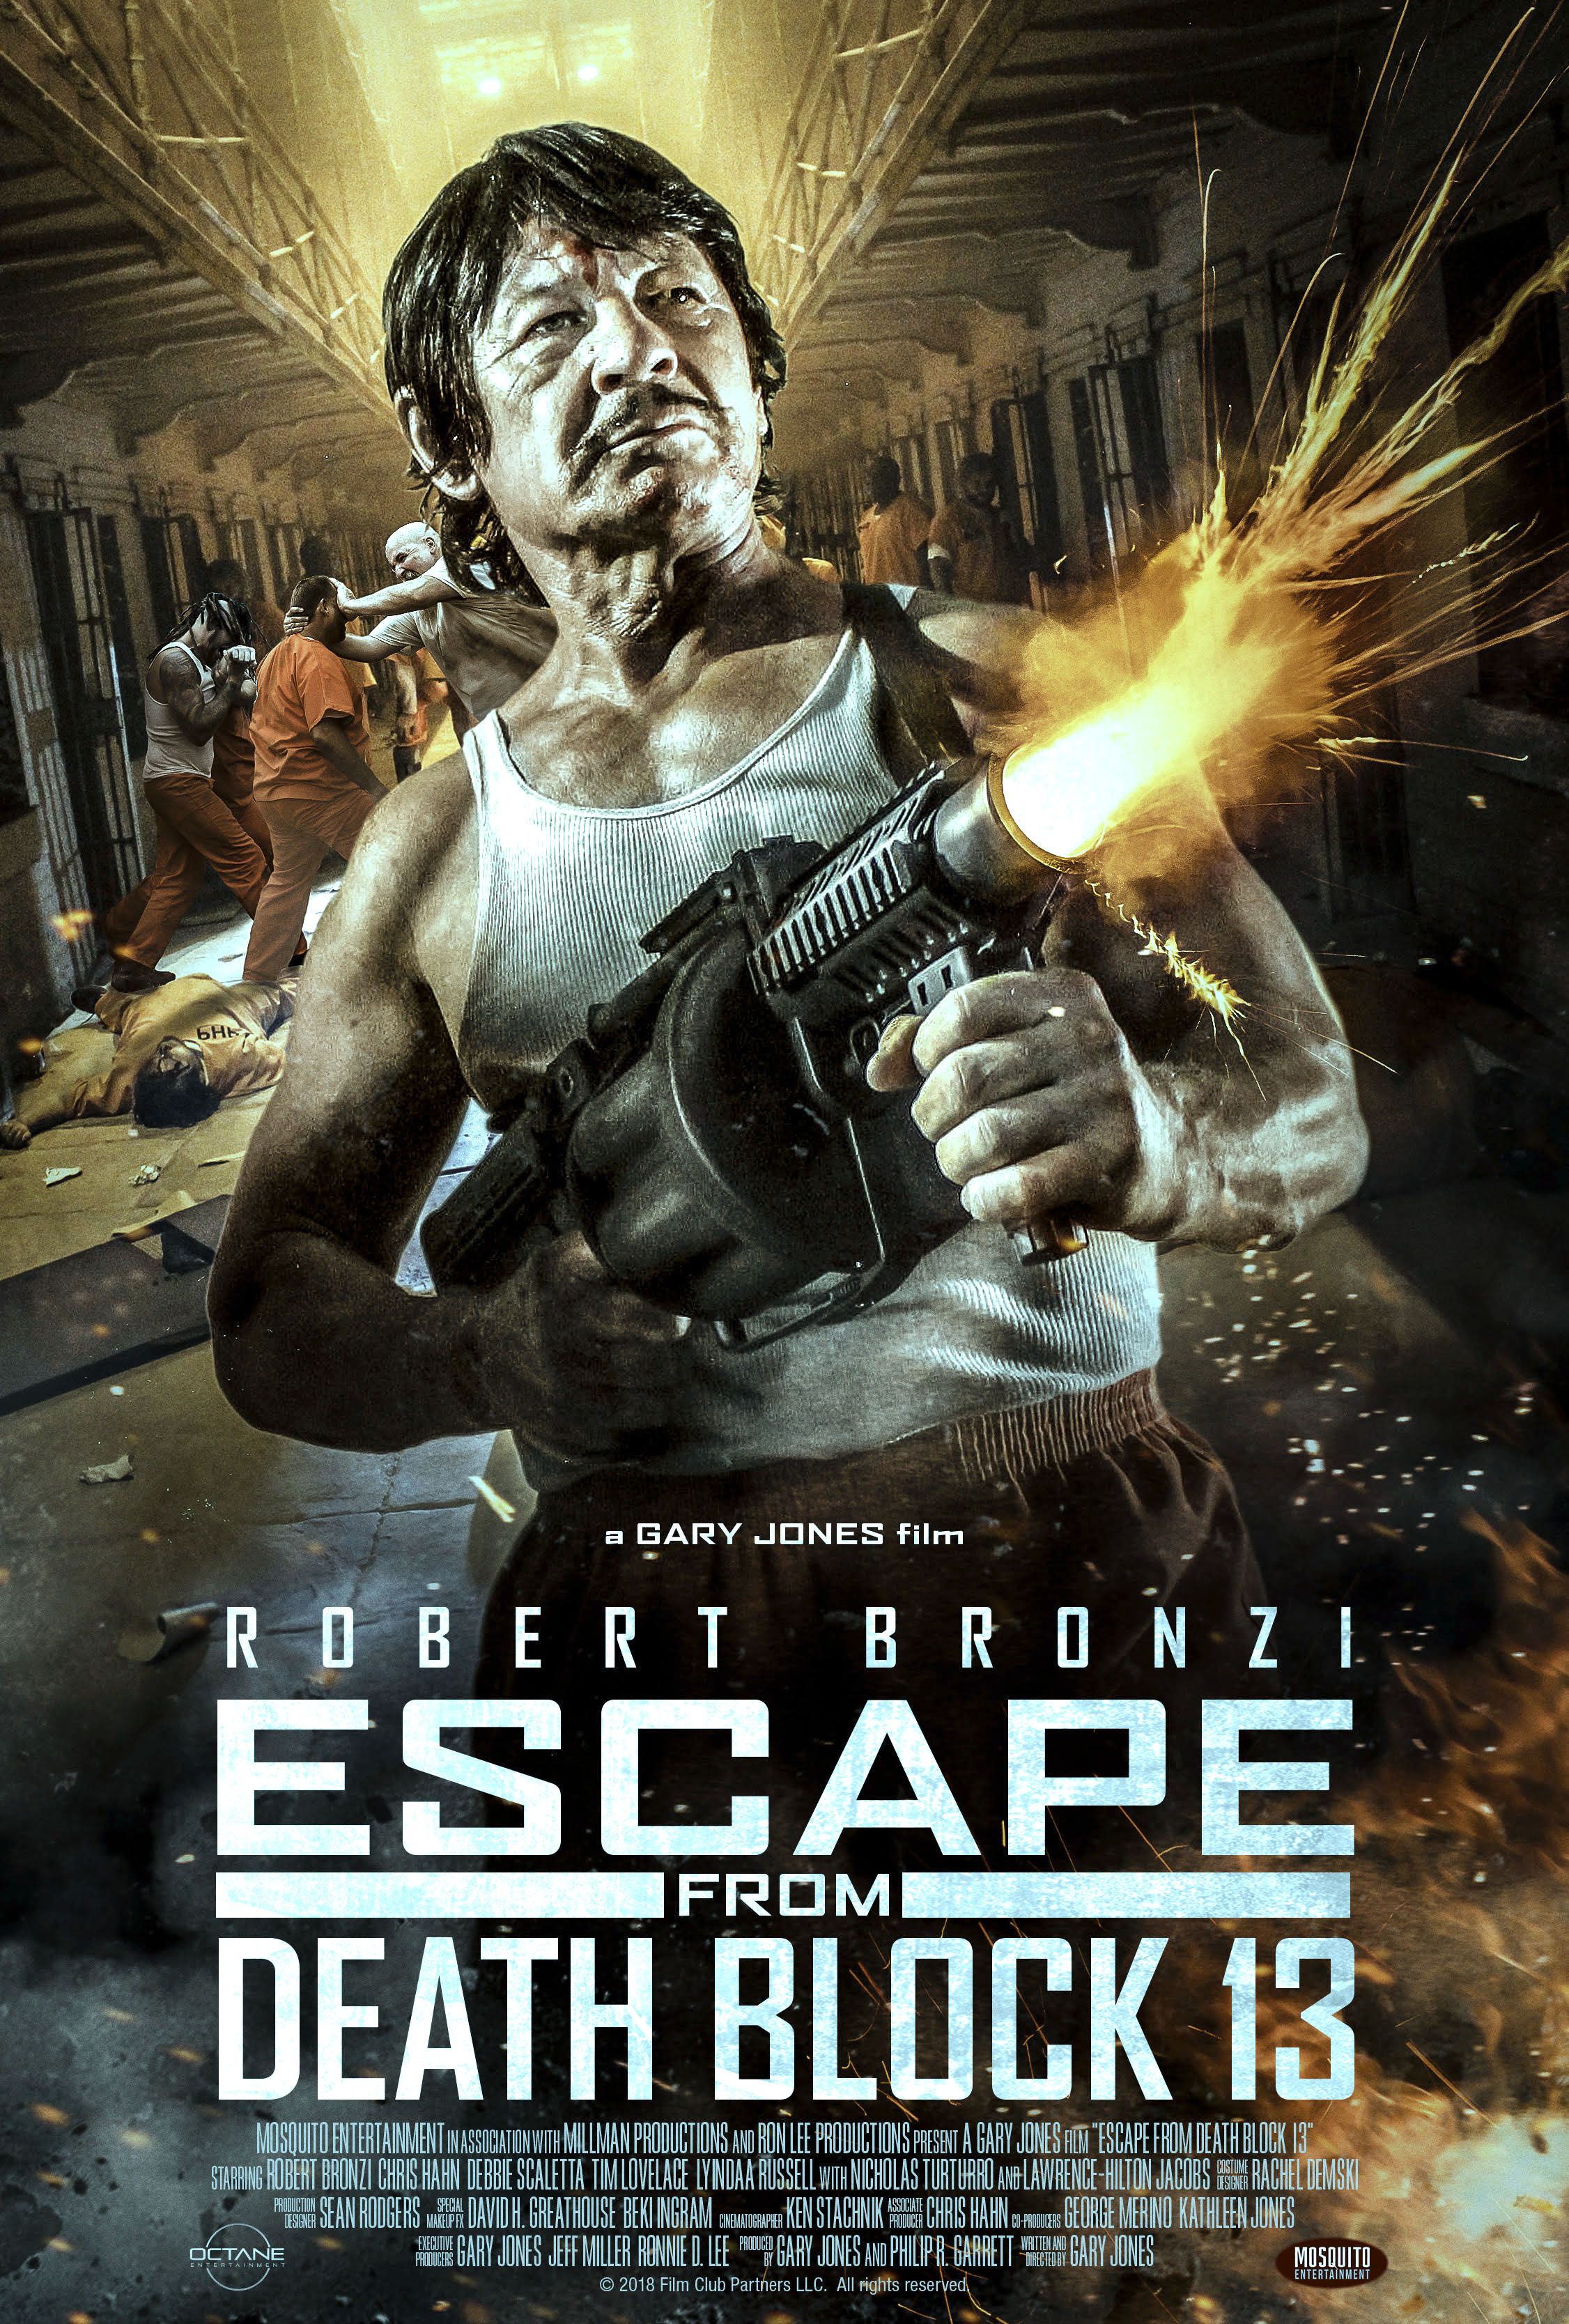 Official movie poster for Escape from Death Block 13